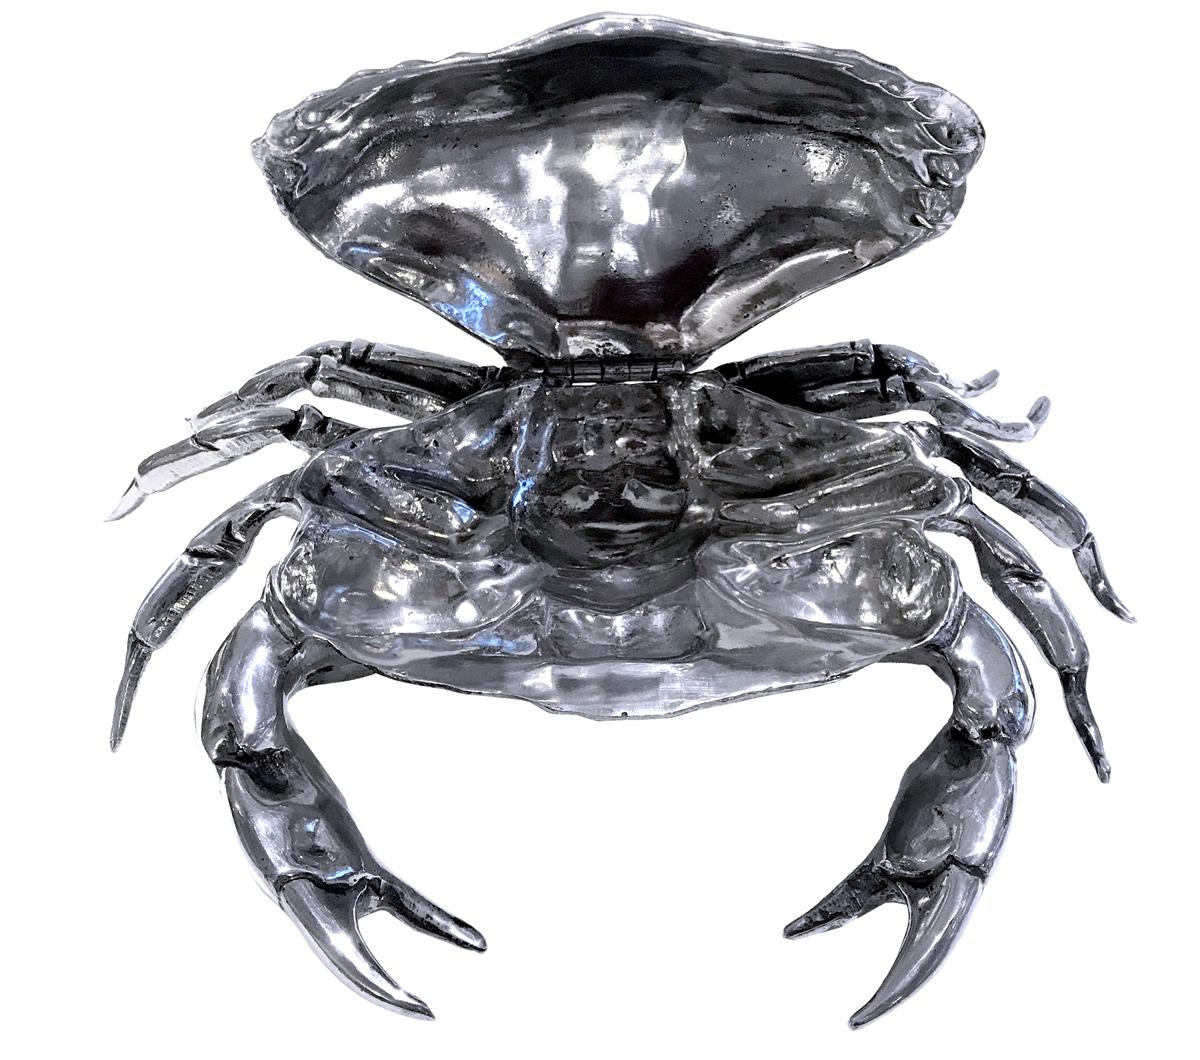 Lovely caviar bowl or box made in pewter in the shape of a crab realistically modeled and textured. The top part of the crab is hinged-mounted and revealed a nice space perfect to be used as a caviar dish or that could be used to present any kind of